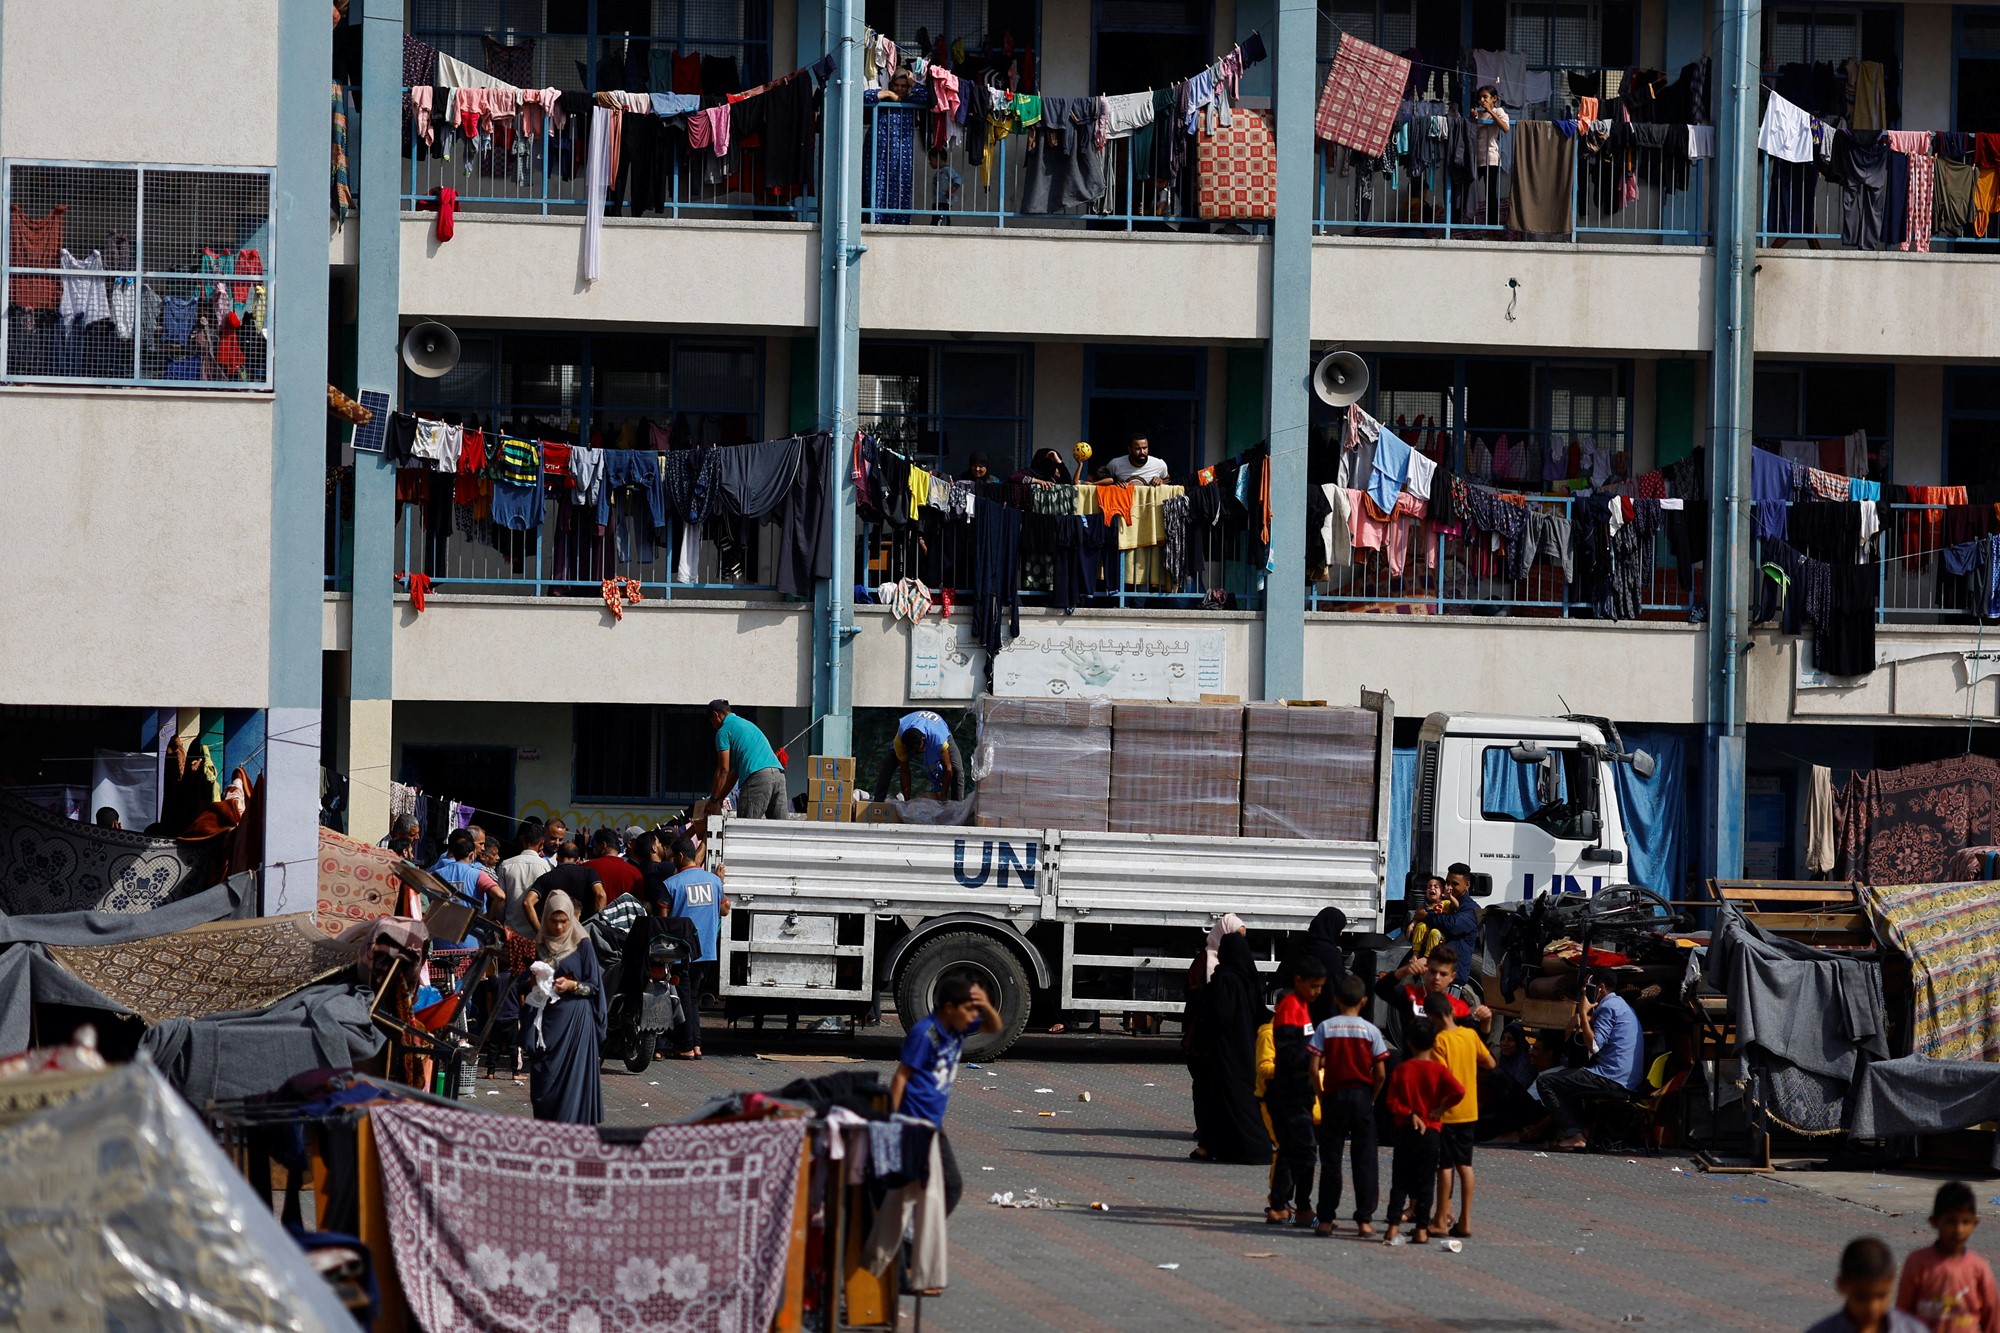 Men hand out aid off of a UN-branded truck as people watch on from balconies.